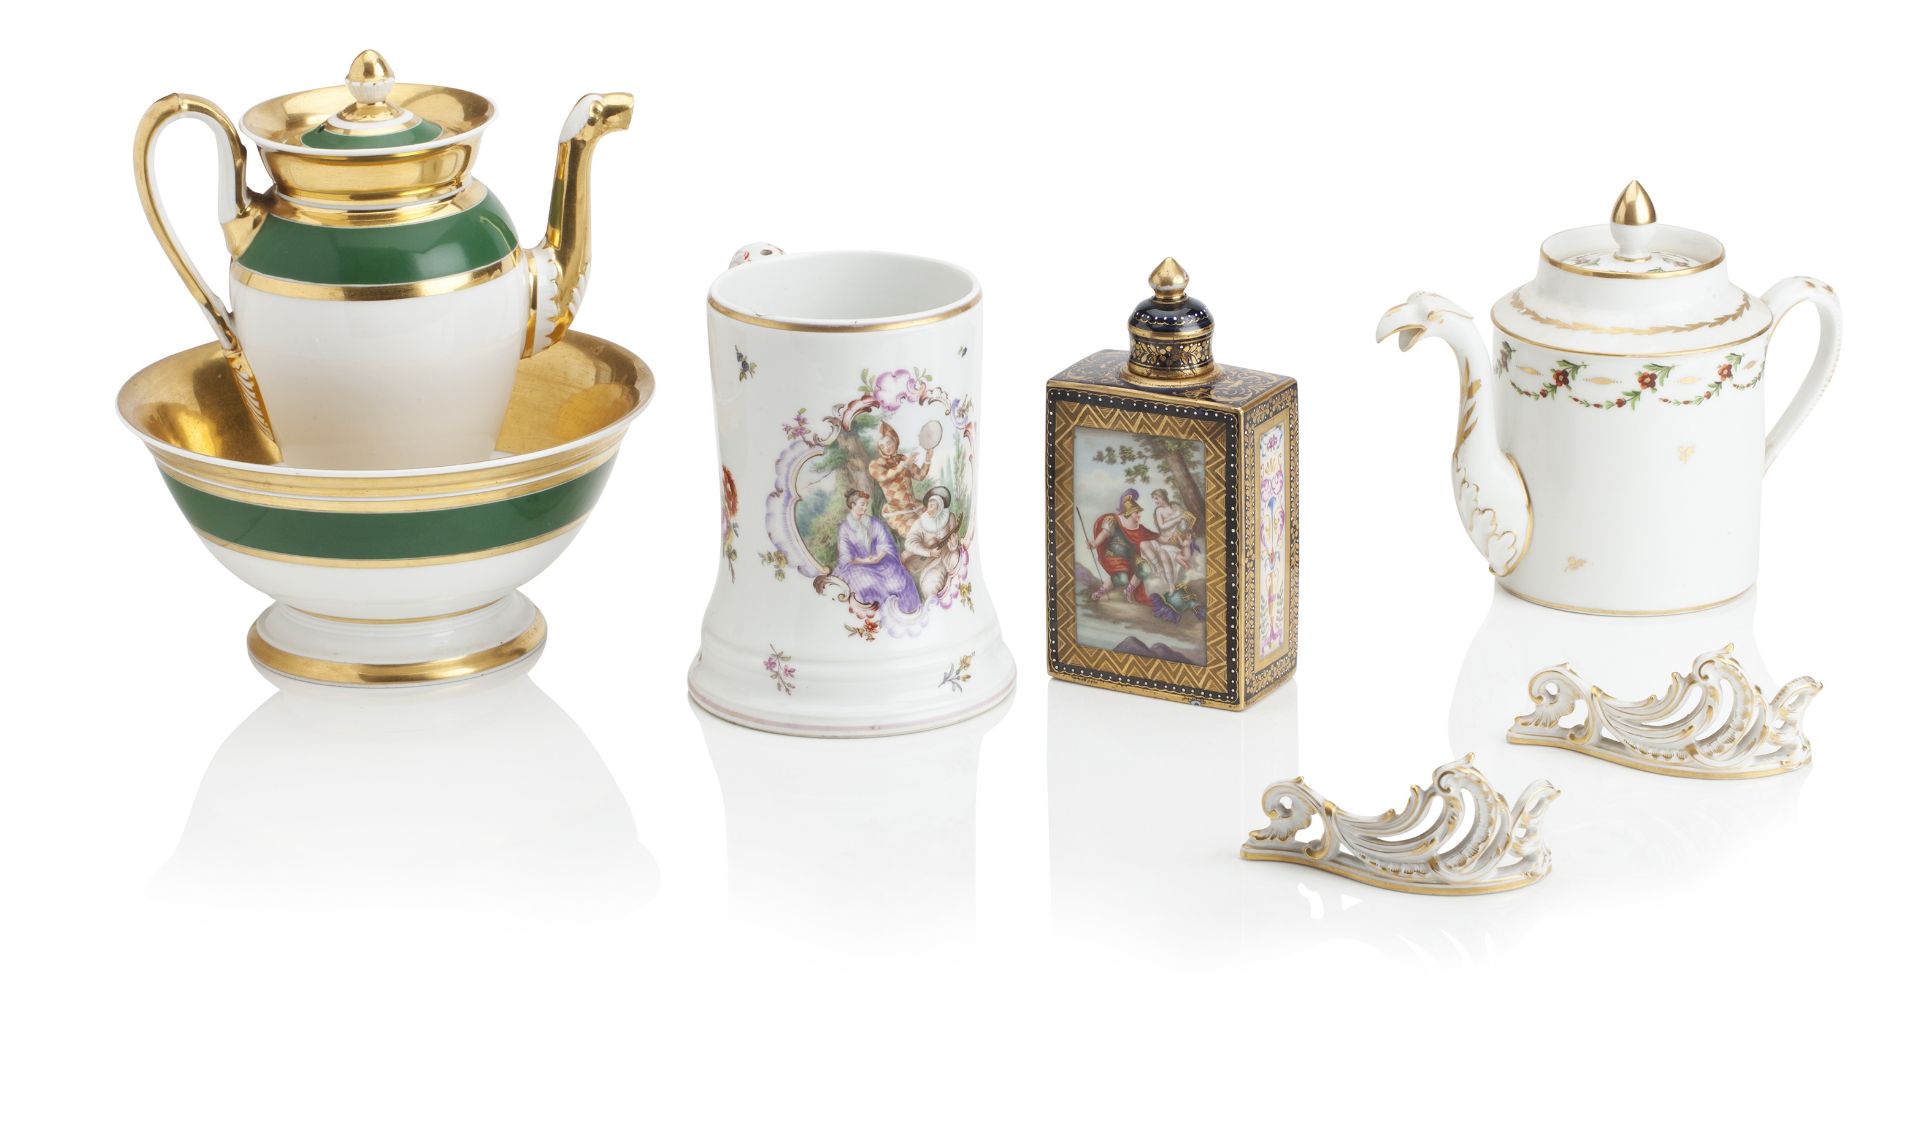 A COLLECTION OF EUROPEAN PORCELAIN 19th century,